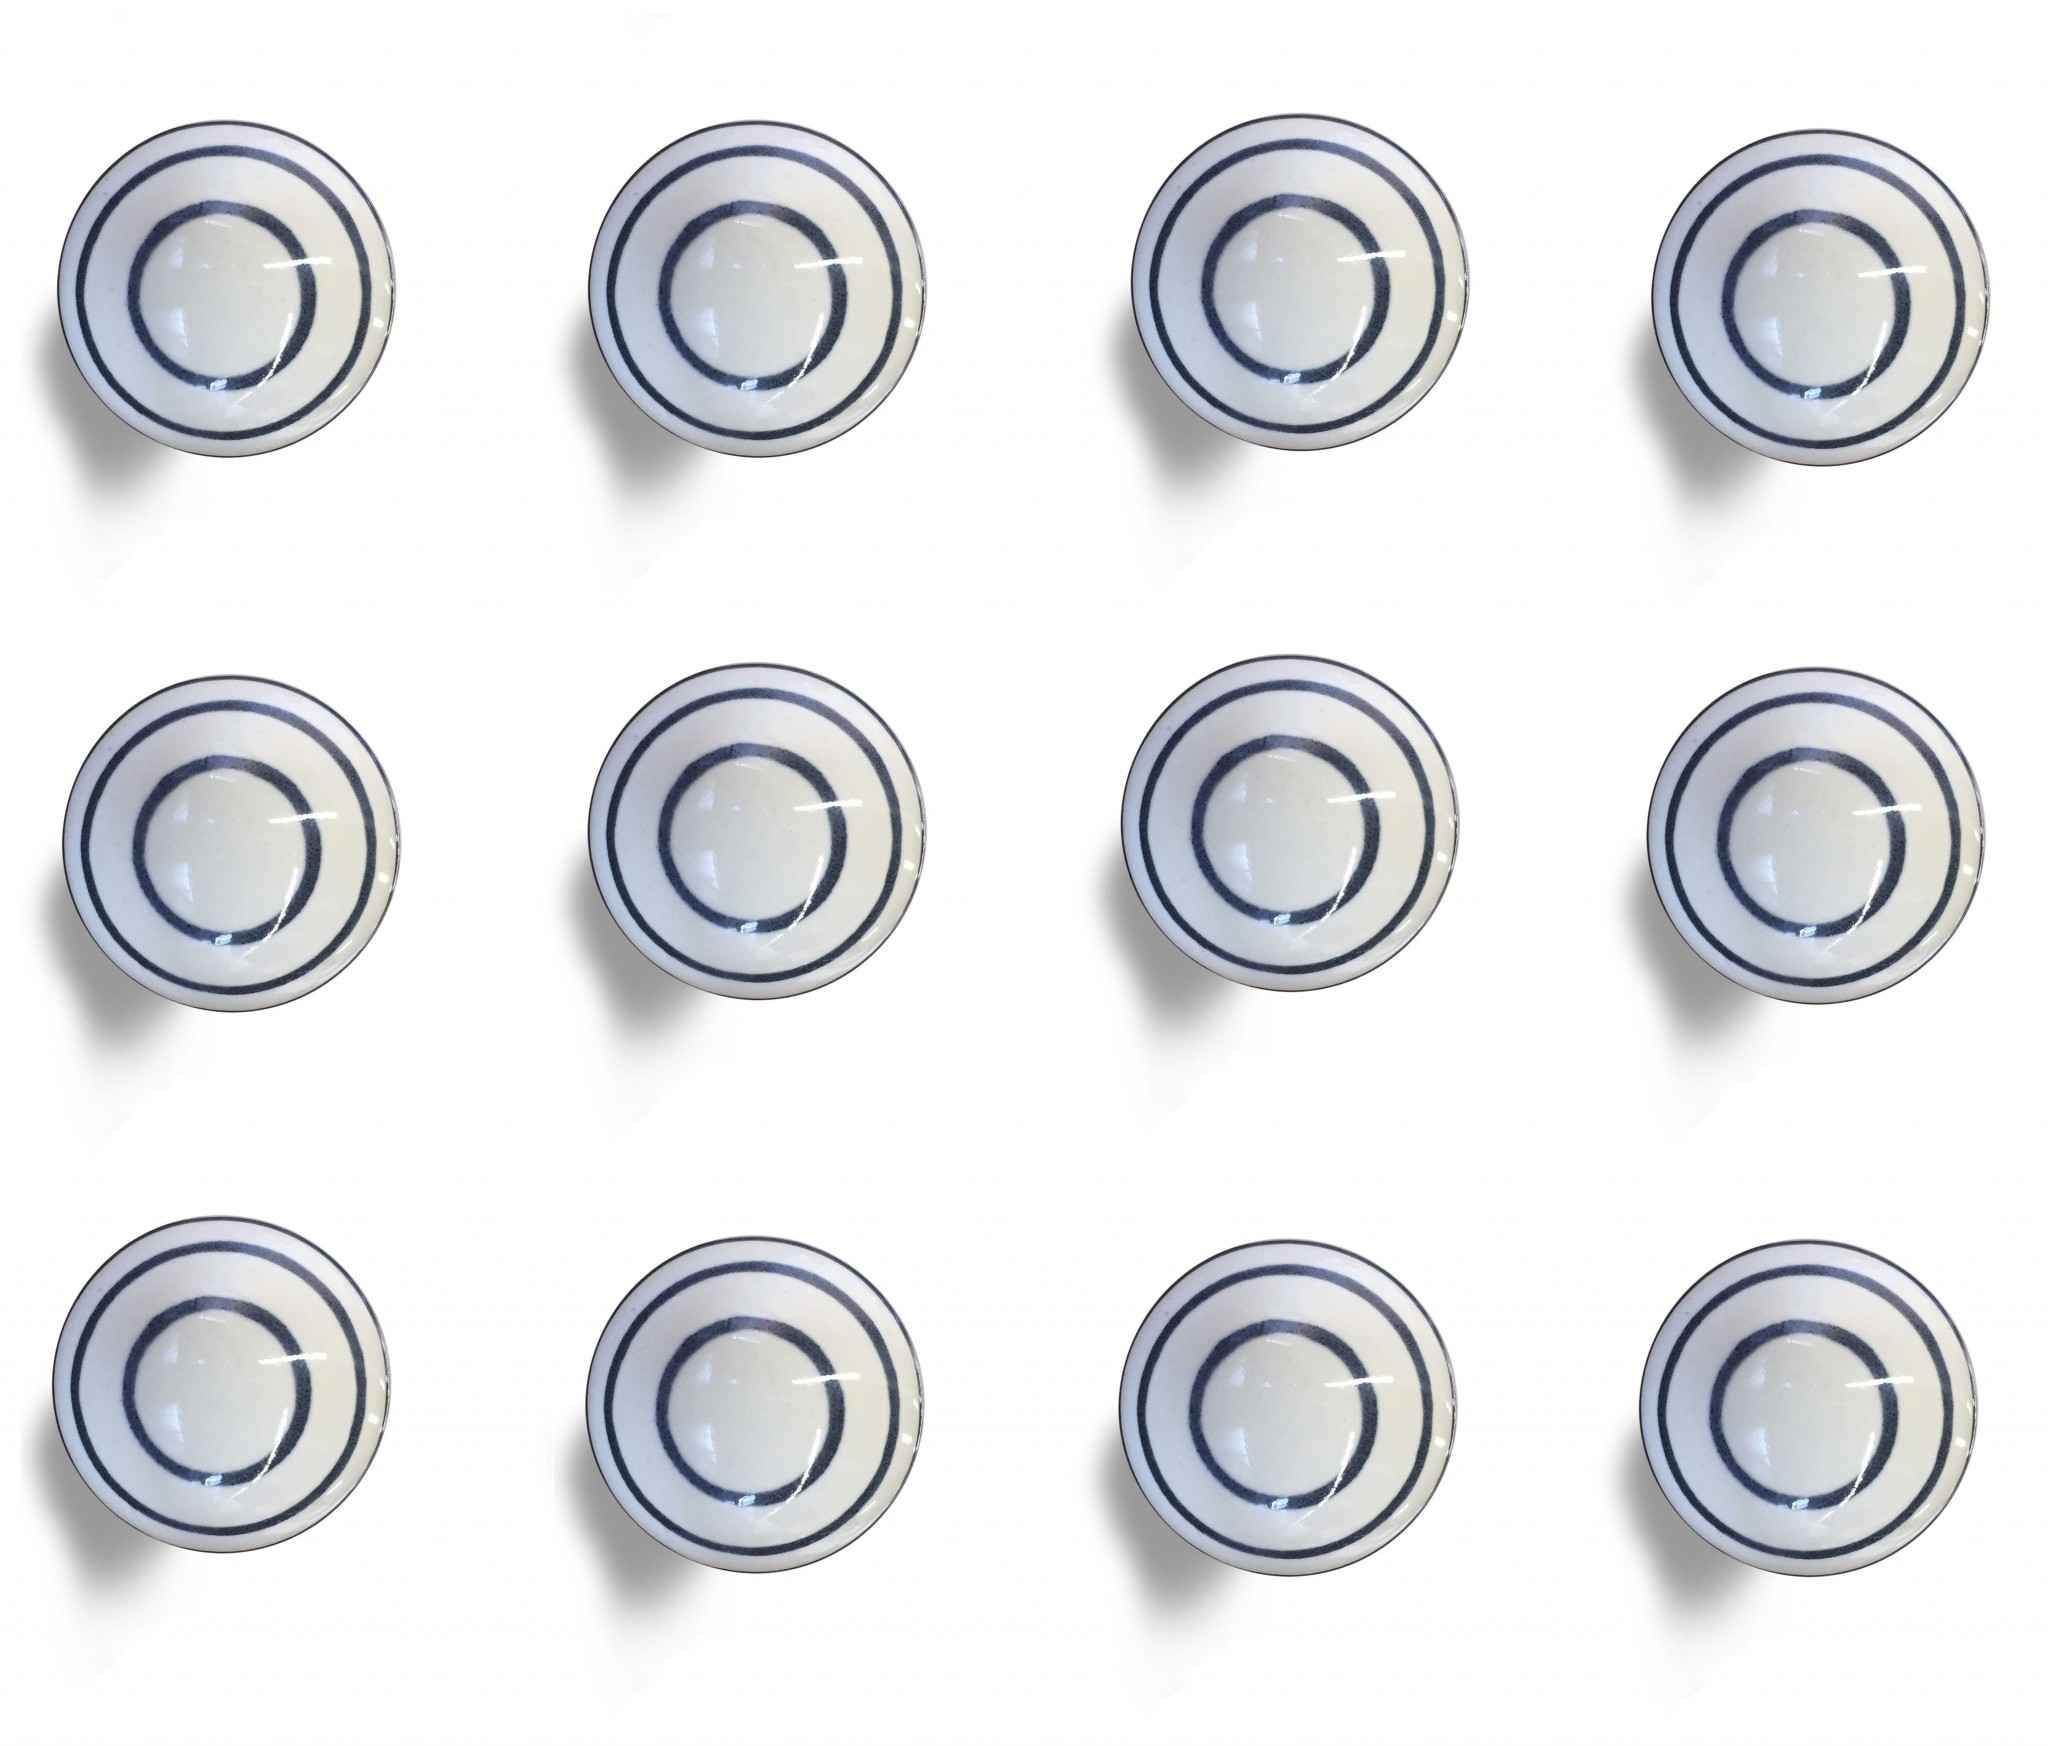 1.5" x 1.5" x 1.5" White and Navy - Knobs 12-Pack